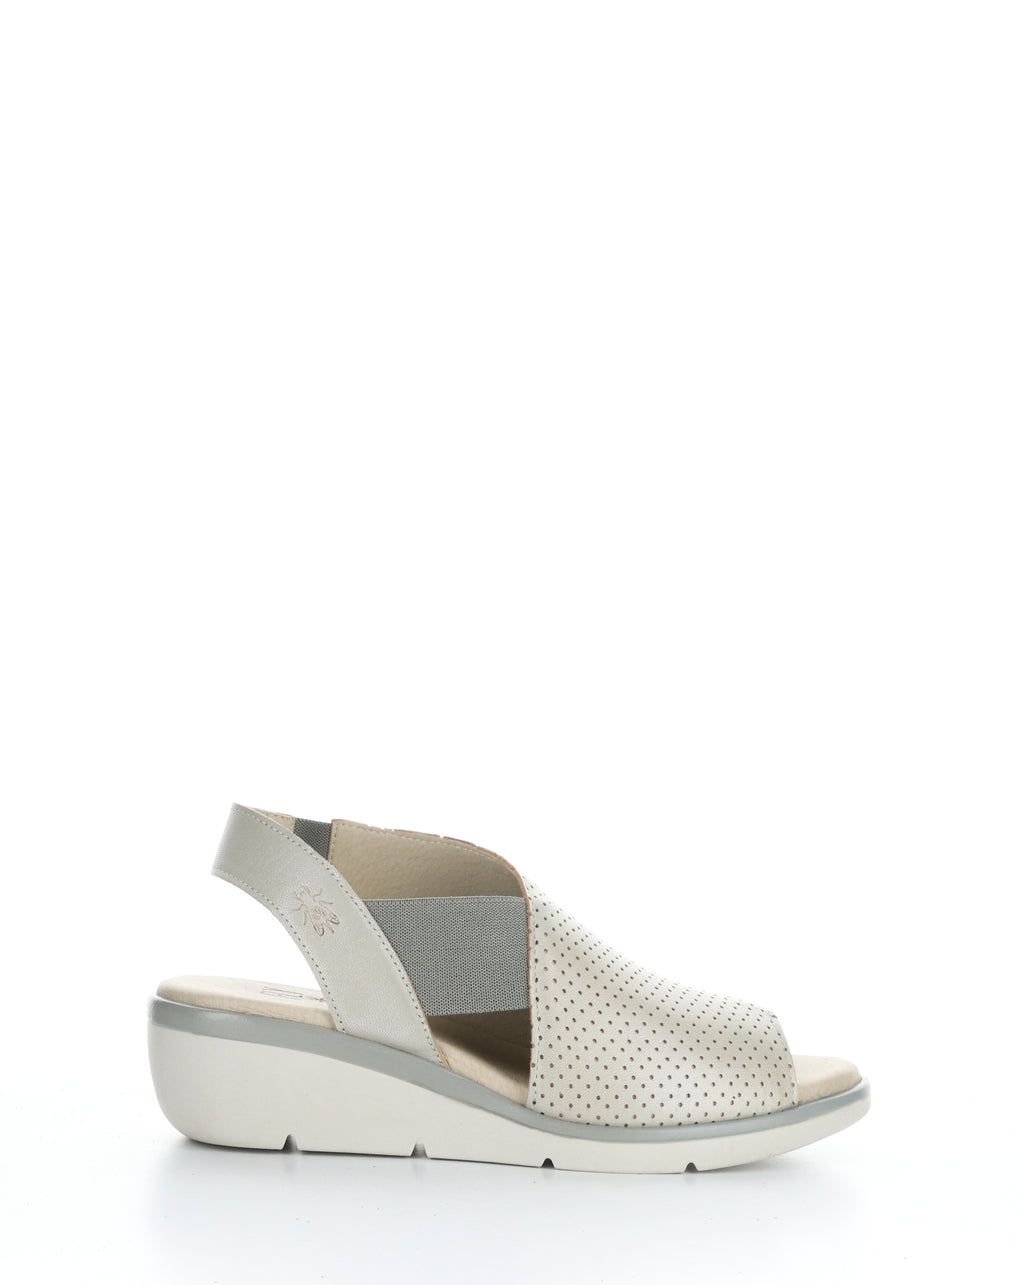 Fly London "Nisi" Silver perf low wedge sandal